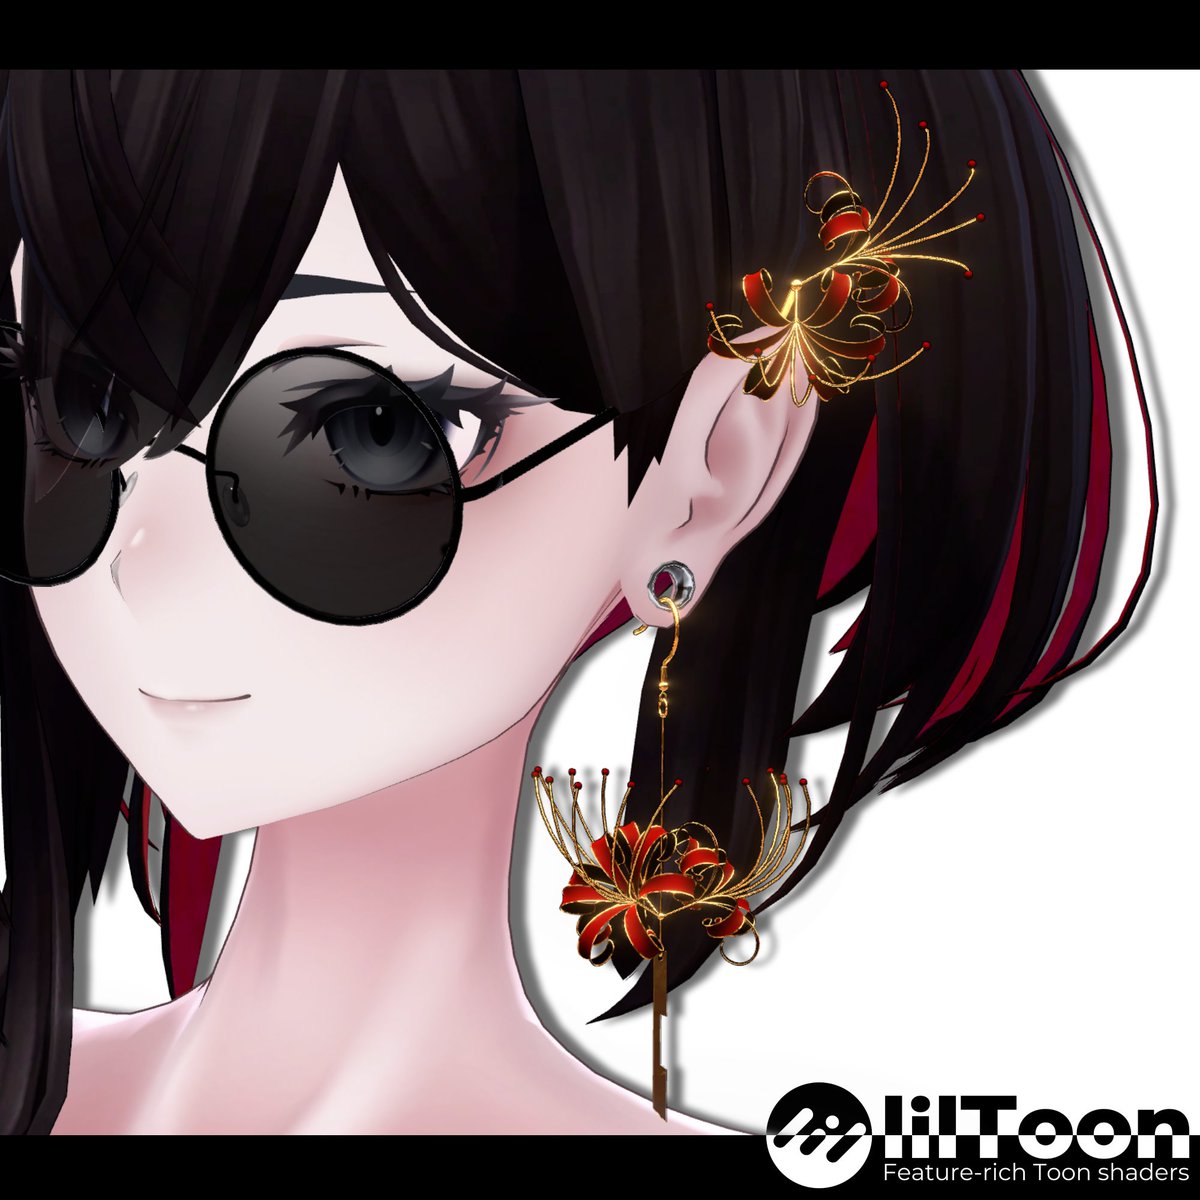 💎New accessories - 新しいアクセサリー💎
🪷Red spider lily - 彼岸花🪷
 
adamrt.booth.pm/items/5791559 

Giveaway! プレゼント抽選会 
-@AdamRT_ART をフォロー 
-このツイートRT 
2名様にプレゼントします!!!  

#VRChat #booth_pm #AdamRT_ART